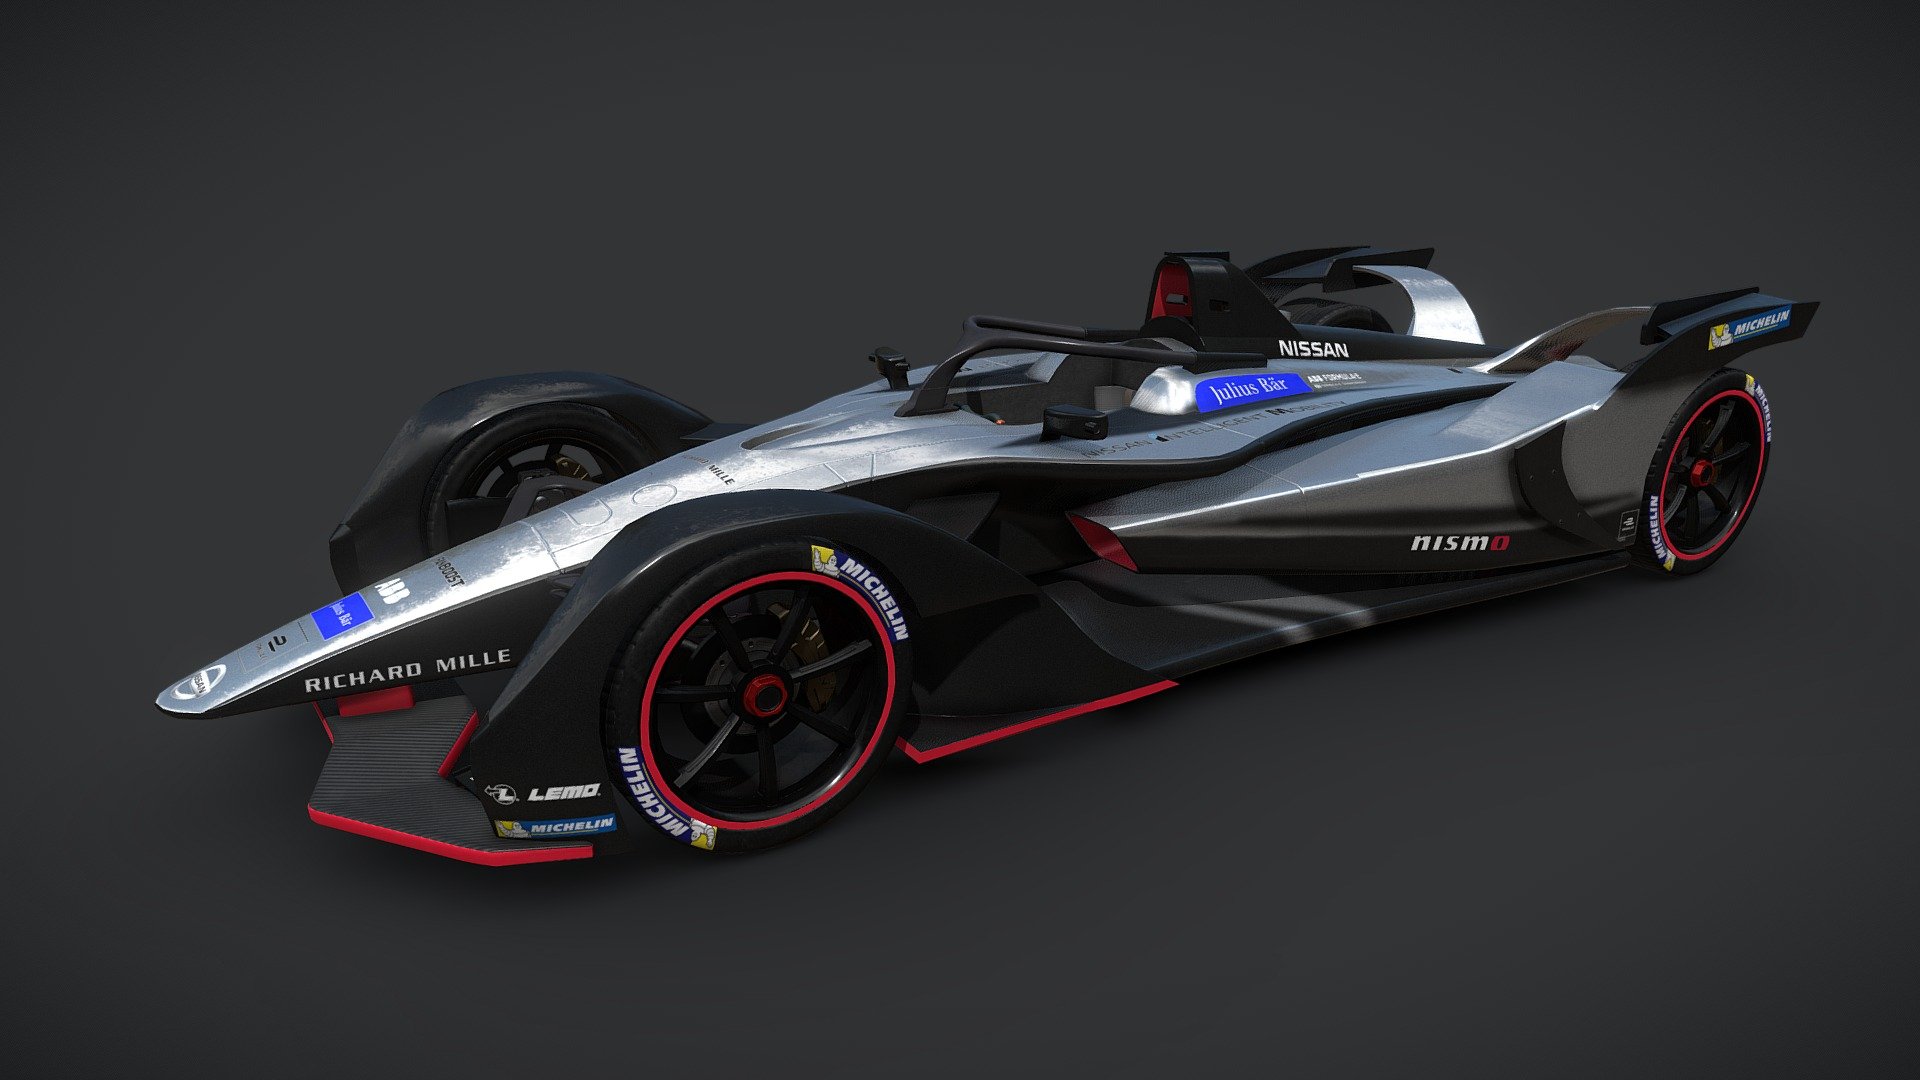 Gen 2 Formula E Nissan Car. Game ready assets, PBR textures and PBR Specula-Glossiness textures are provided. Thanks for purchasing! Enjoy! - Gen 2 Formula E Nissan Car - Buy Royalty Free 3D model by itsyourbuddy (@rezawicaksono) 3d model